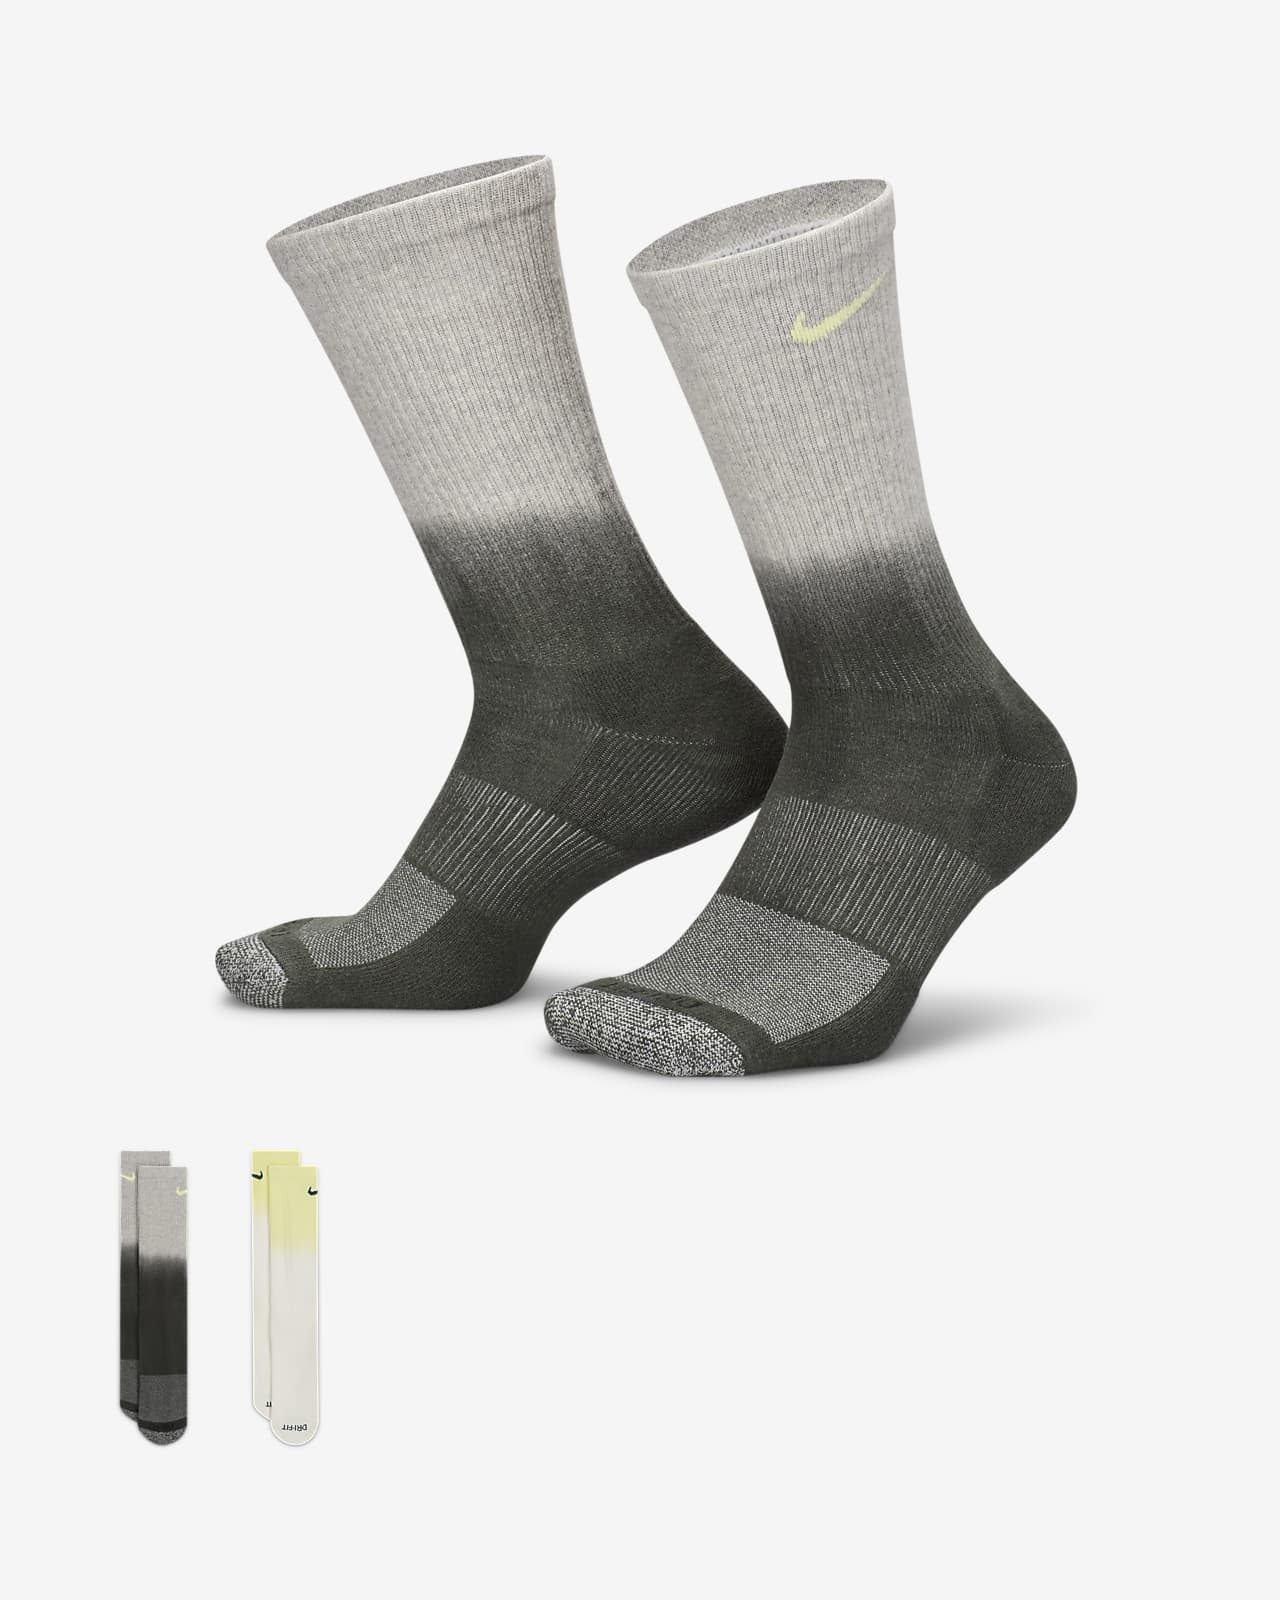 Nike Everyday Plus Cushioned Calcetines largos (2 pares)